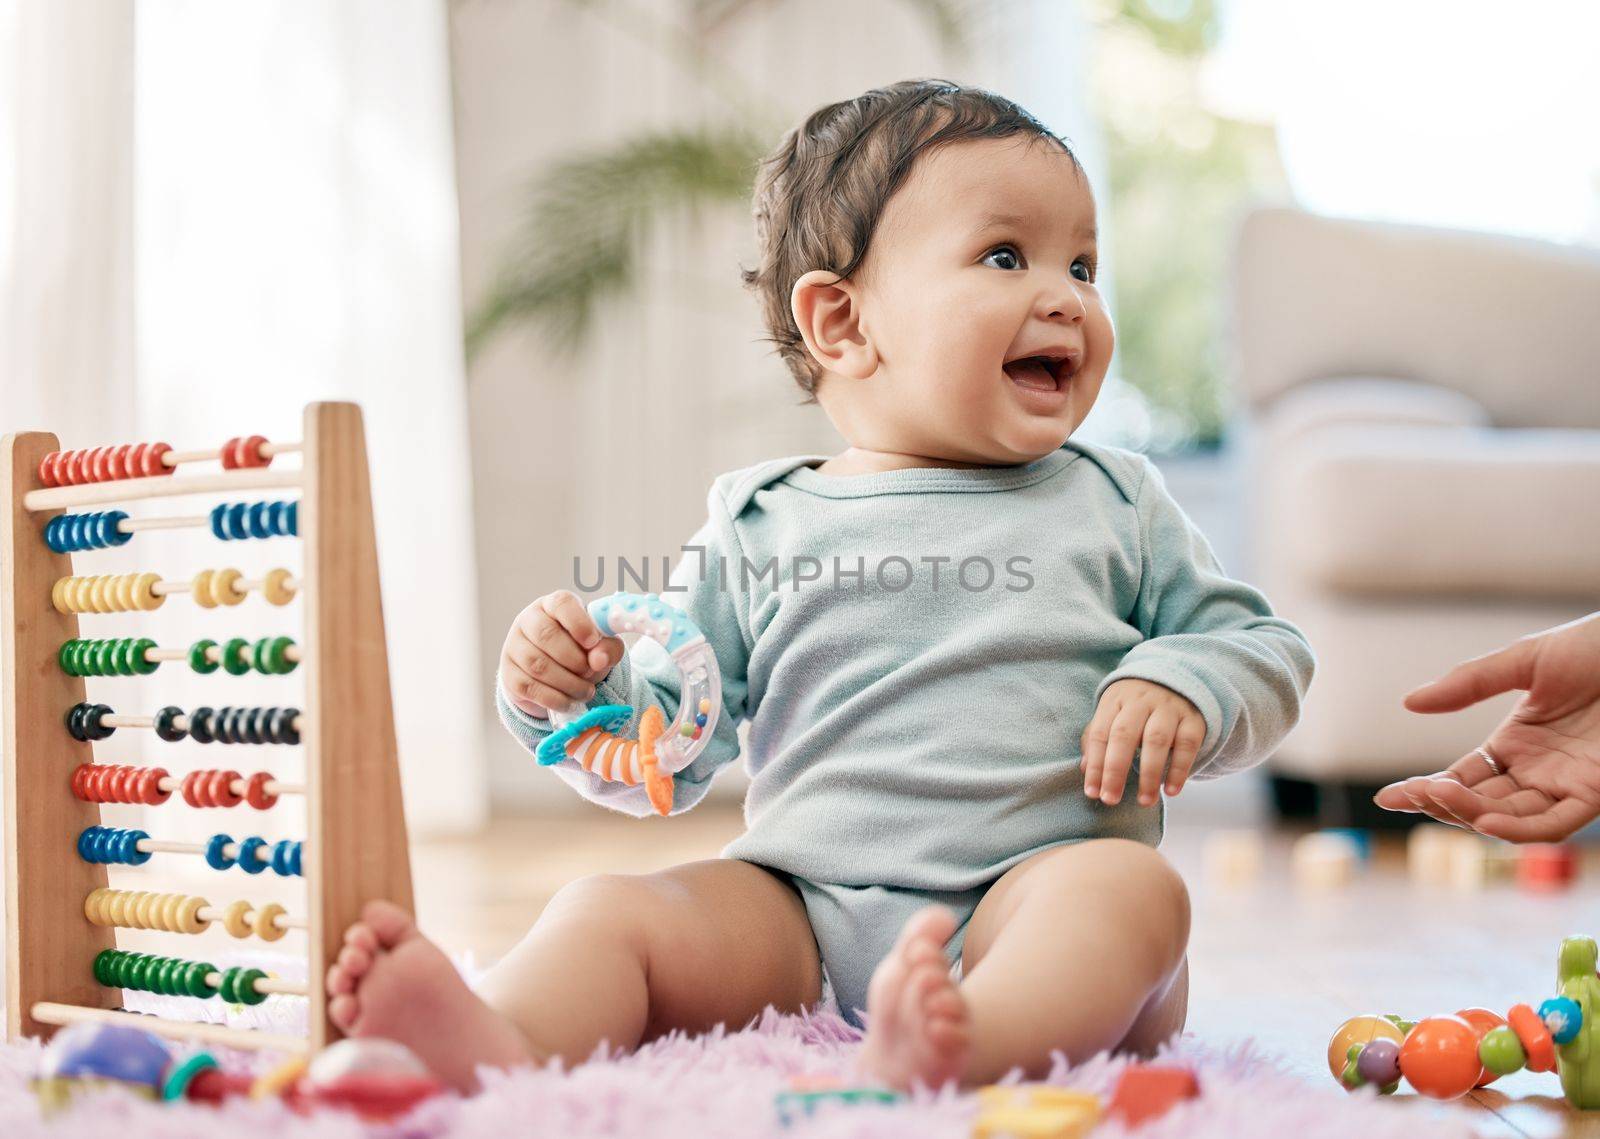 Babies know how to have a good time. an adorable baby playing with toys at home. by YuriArcurs